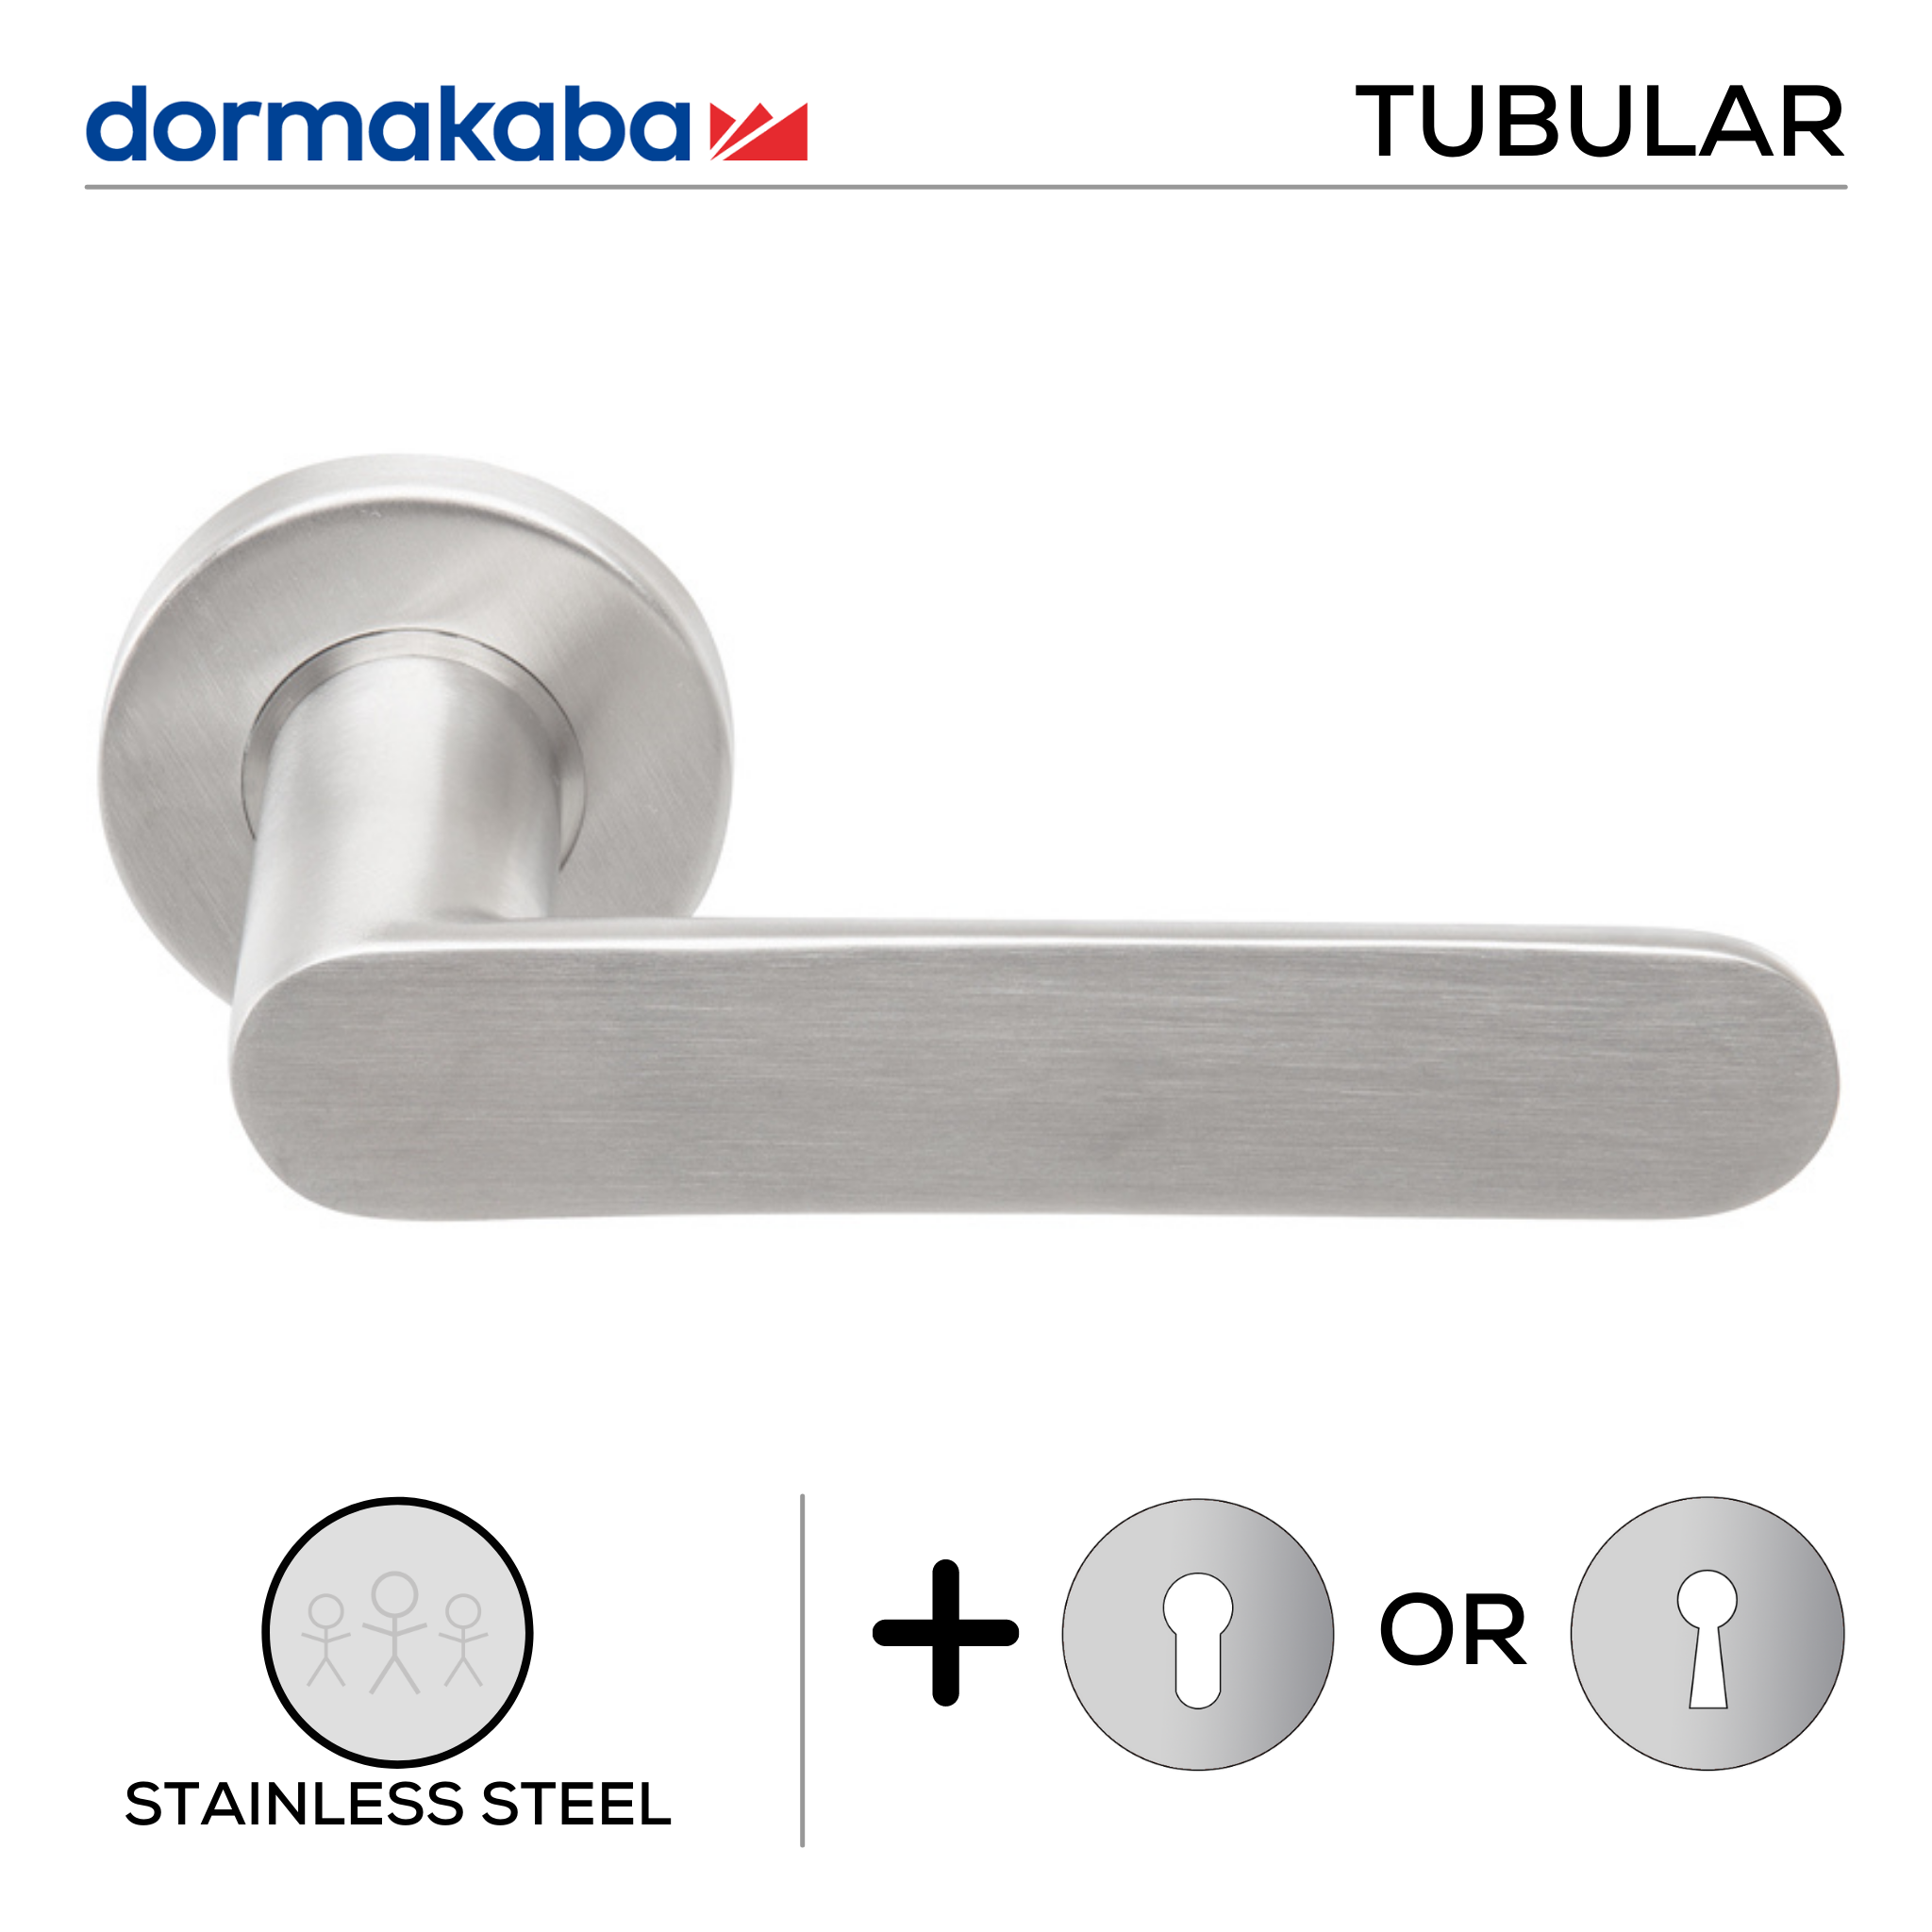 TH 132, Lever Handles, Tubular, On Round Rose, With Escutcheons, 140mm (l), Stainless Steel, DORMAKABA